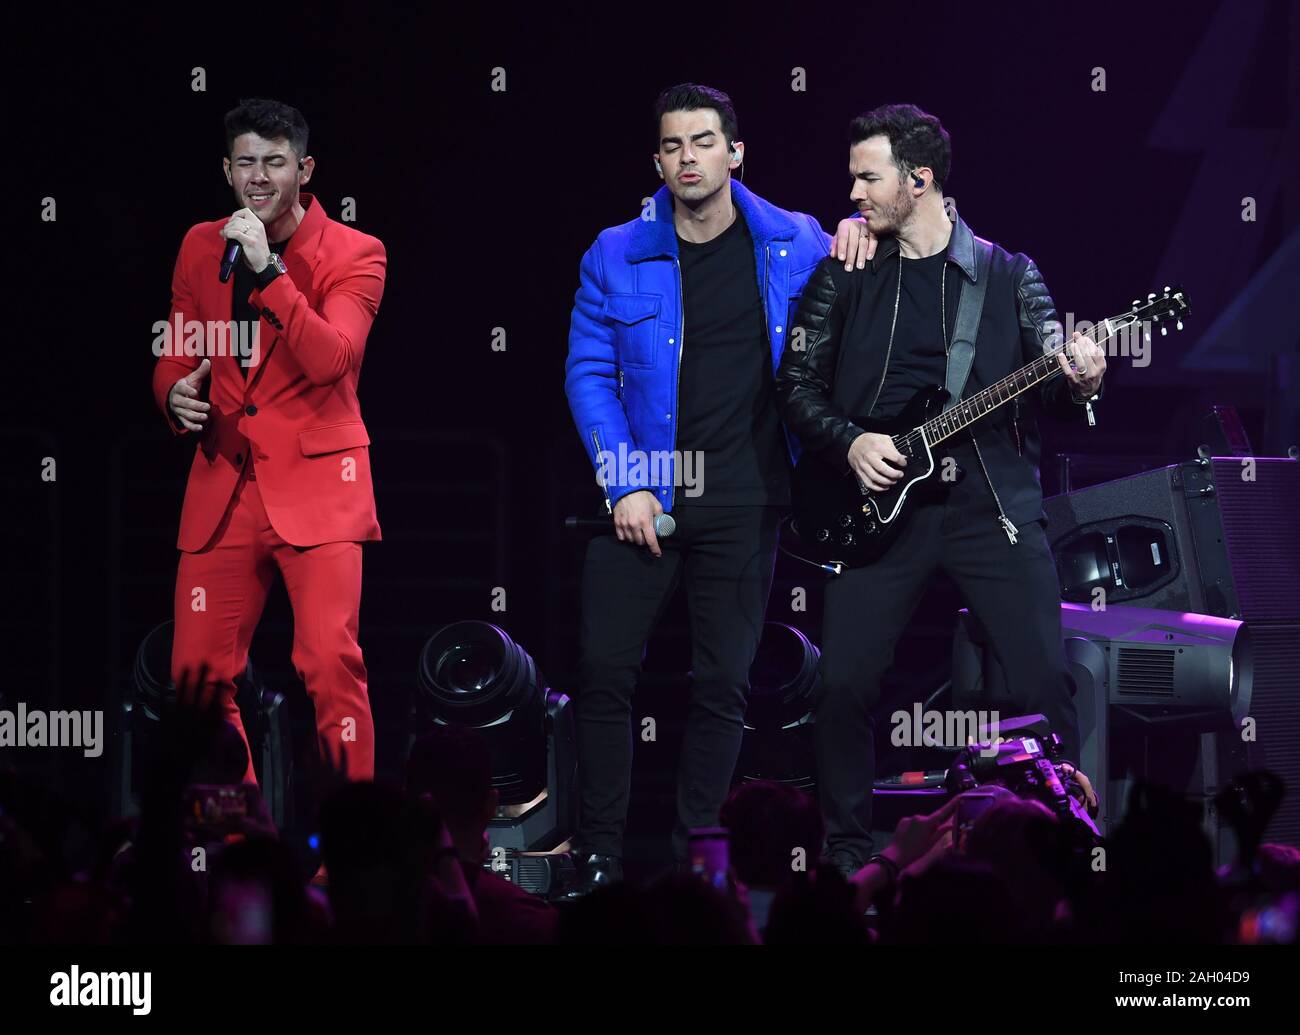 Sunrise FL, USA. 22nd Dec, 2019. The Jonas Brothers perform during Y100 Jingle Ball 2019 at The BB&T Center on December 22, 2019 in Sunrise, Florida. Credit: Mpi04/Media Punch/Alamy Live News Stock Photo